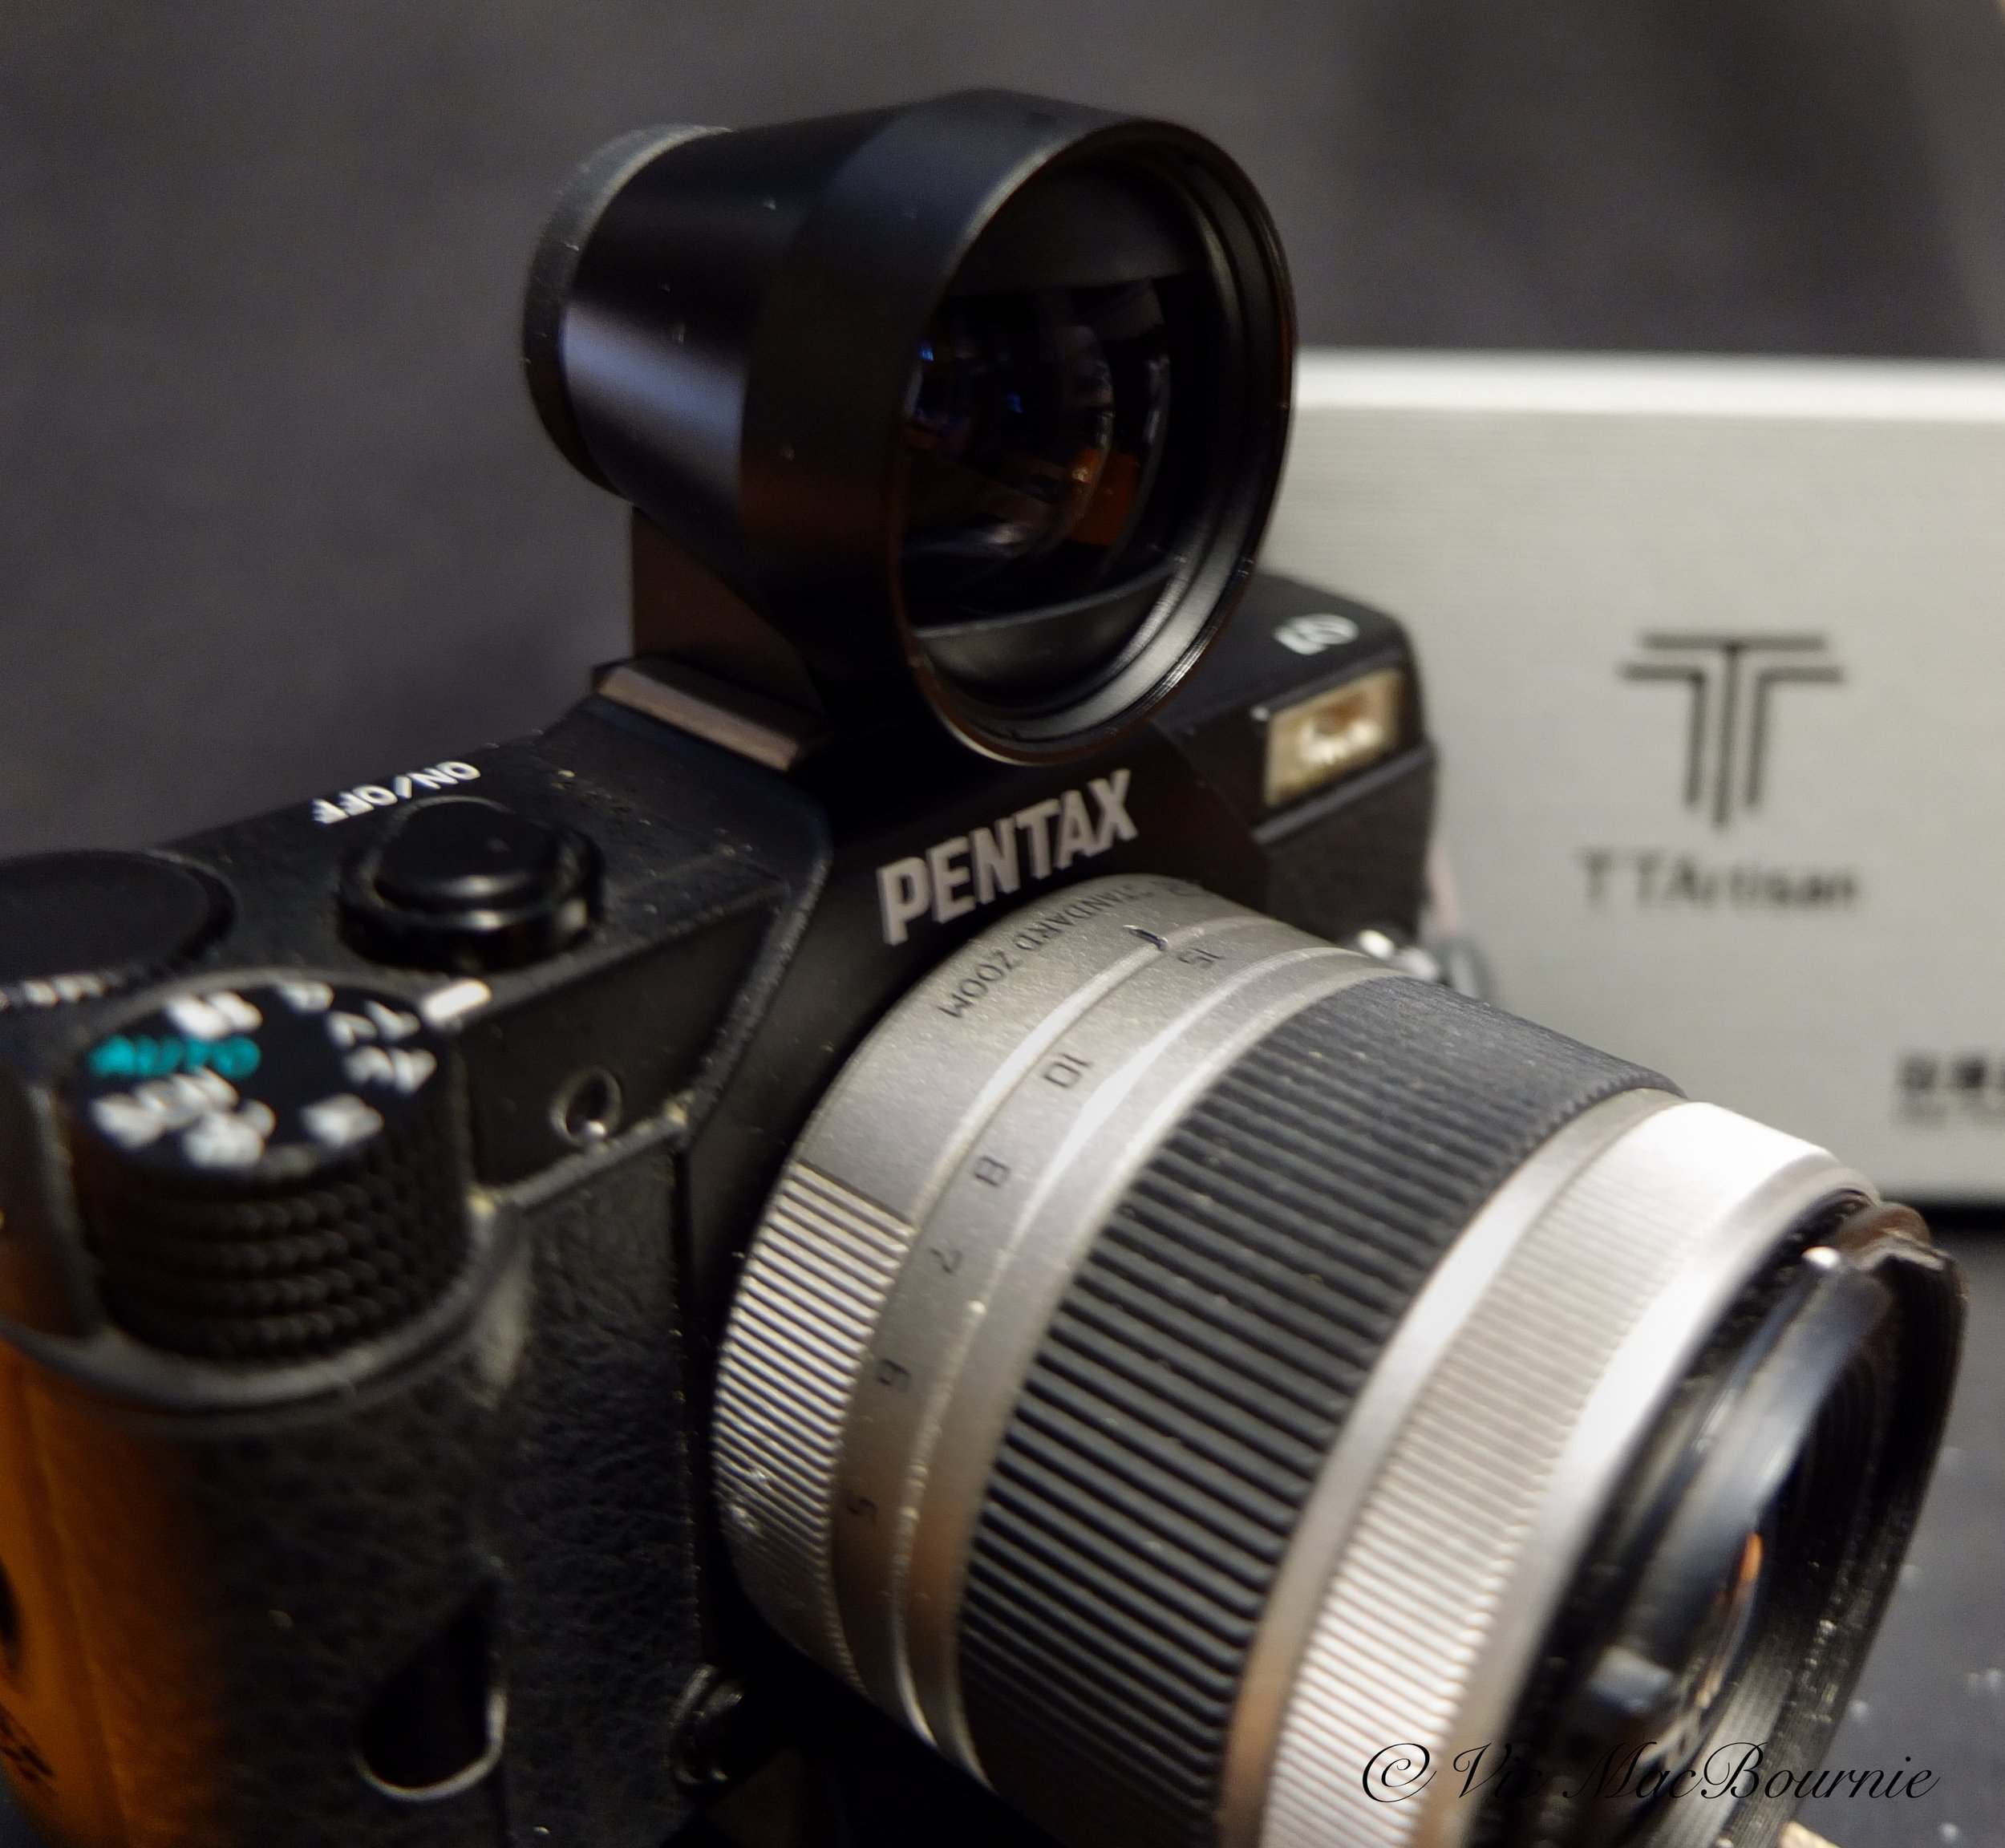 Pictured is the TTArtisan viewfinder paired with my Pentax Q miniature camera